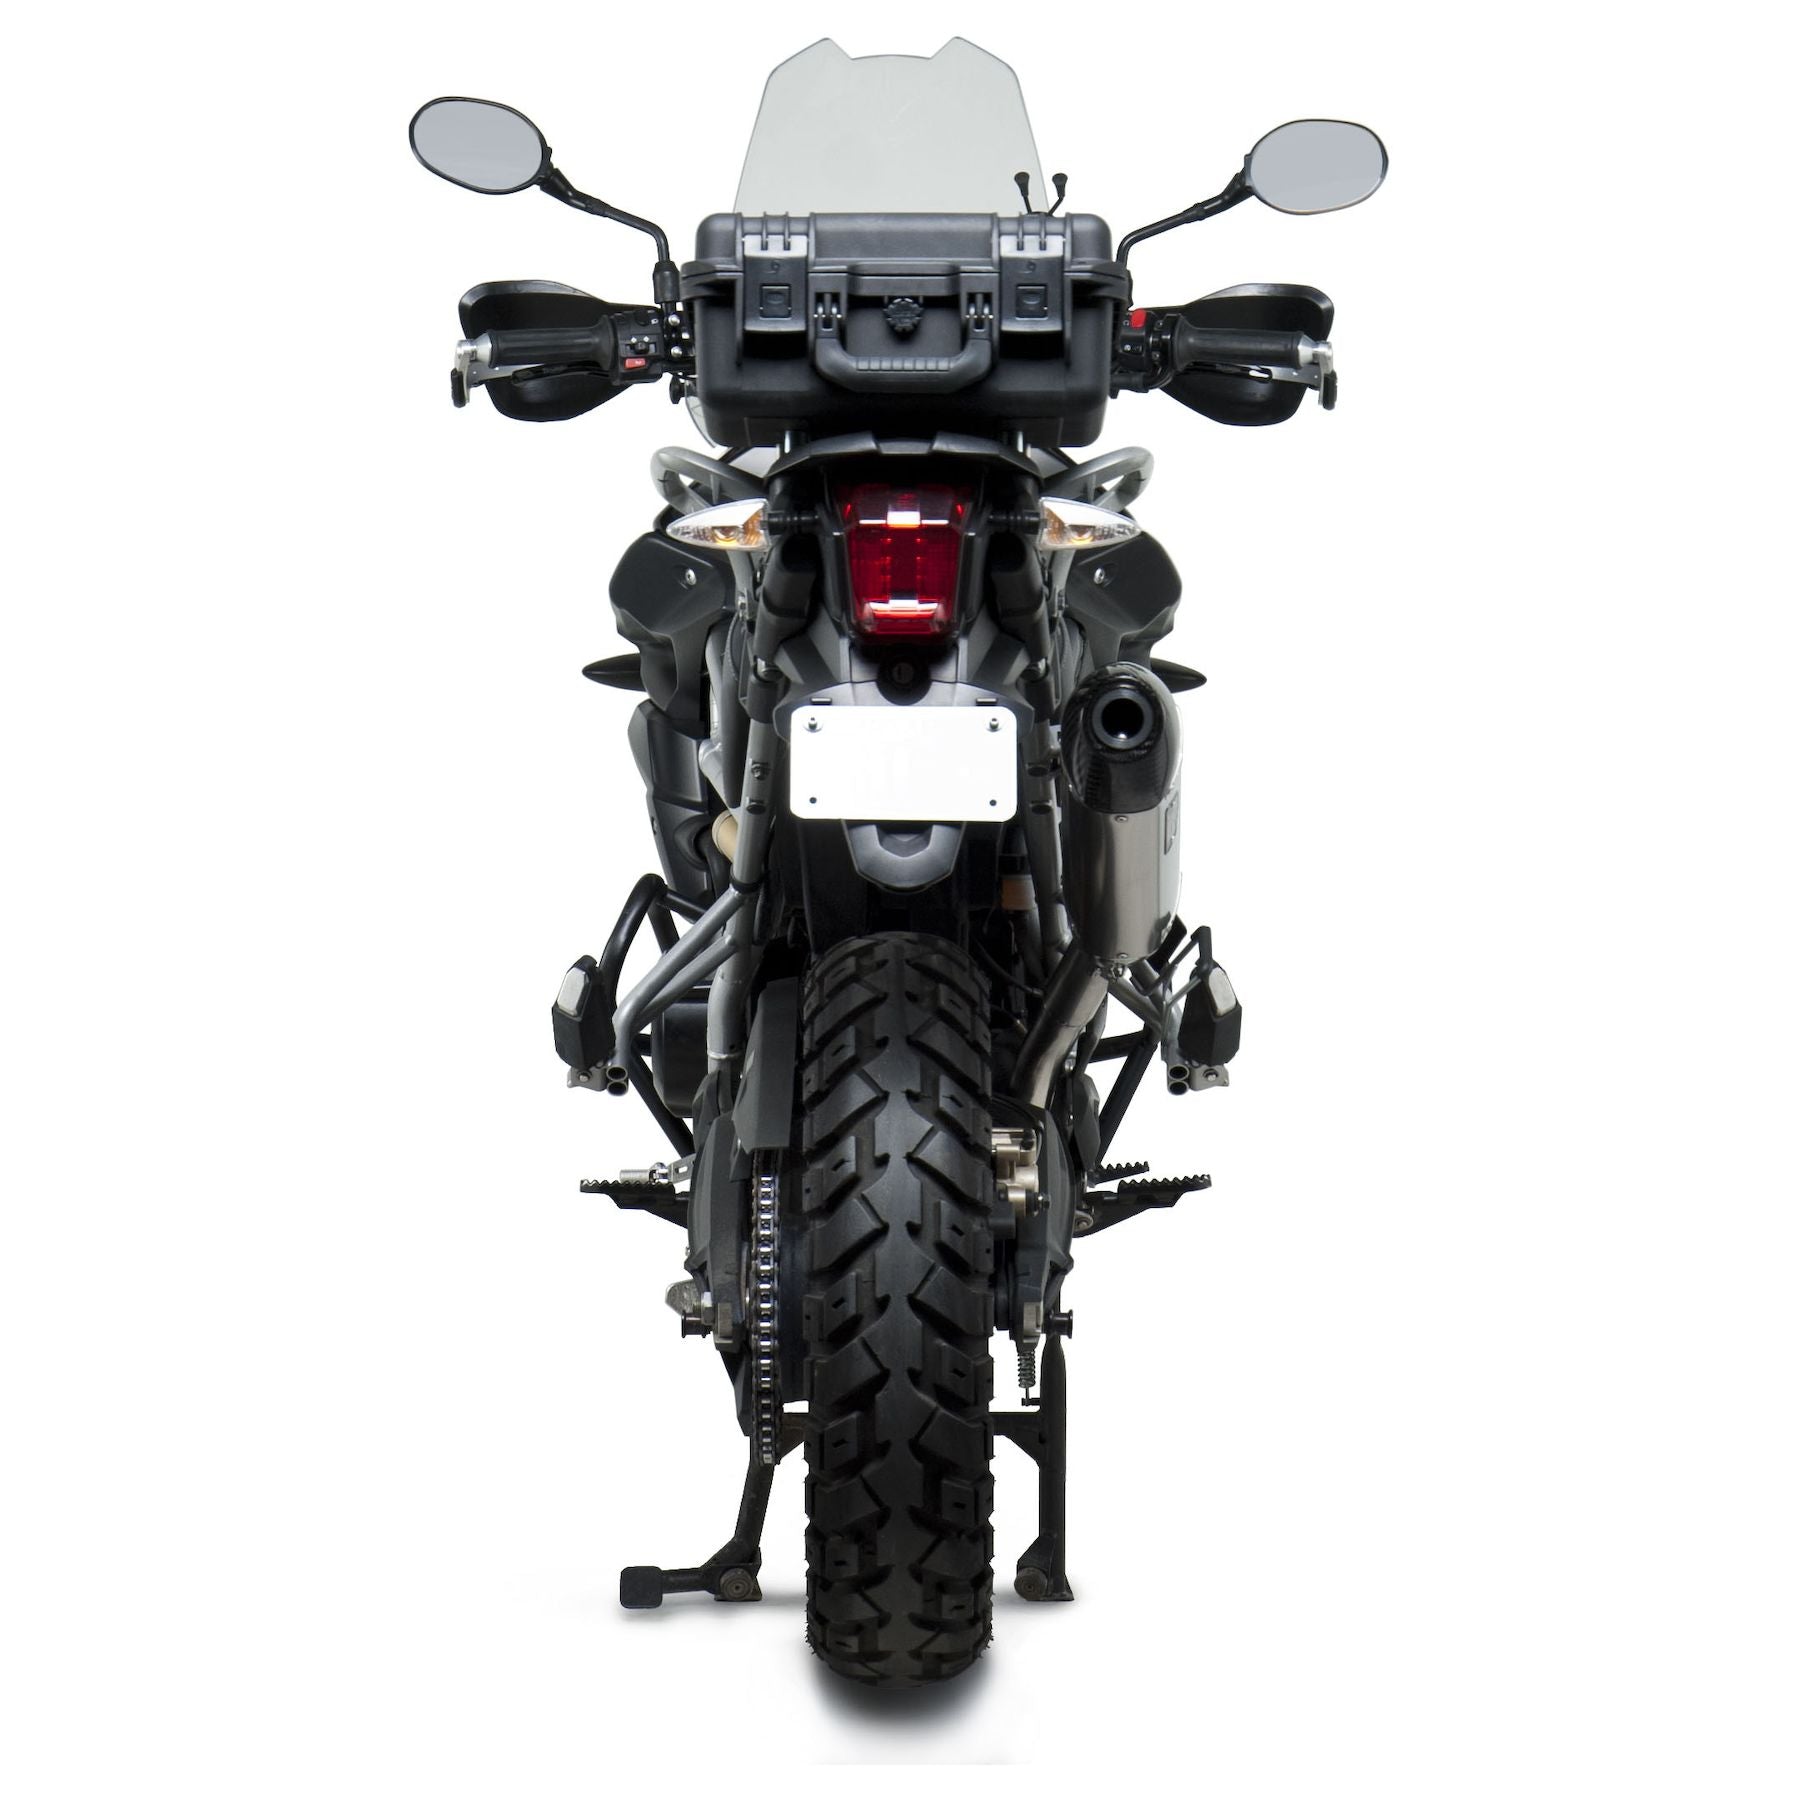 Yoshimura RS4 Street Slip-On Exhaust for Triumph Tiger 800